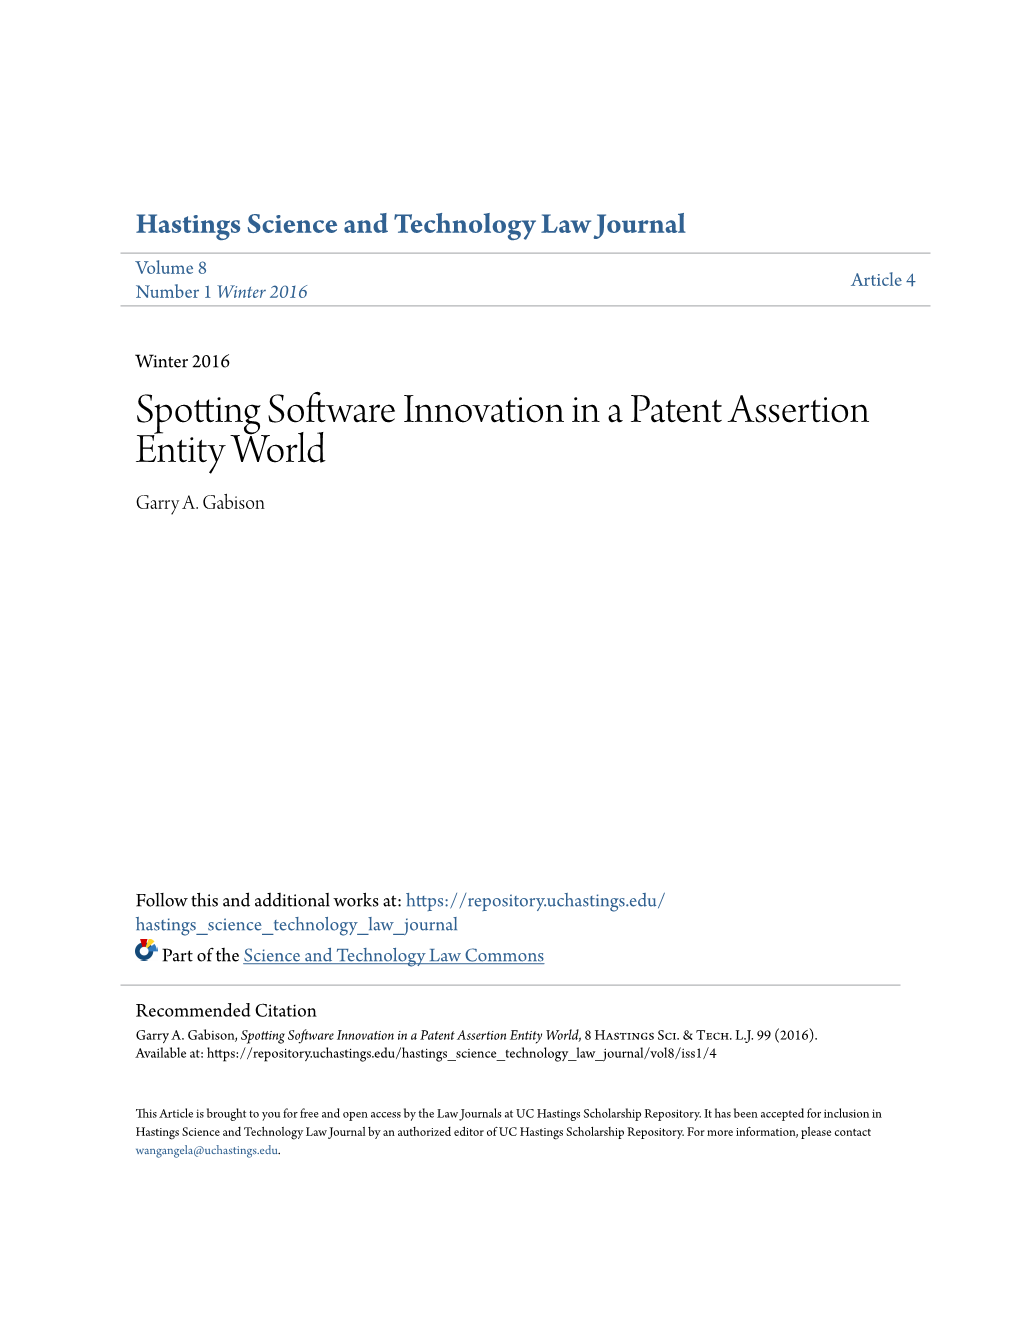 Spotting Software Innovation in a Patent Assertion Entity World Garry A